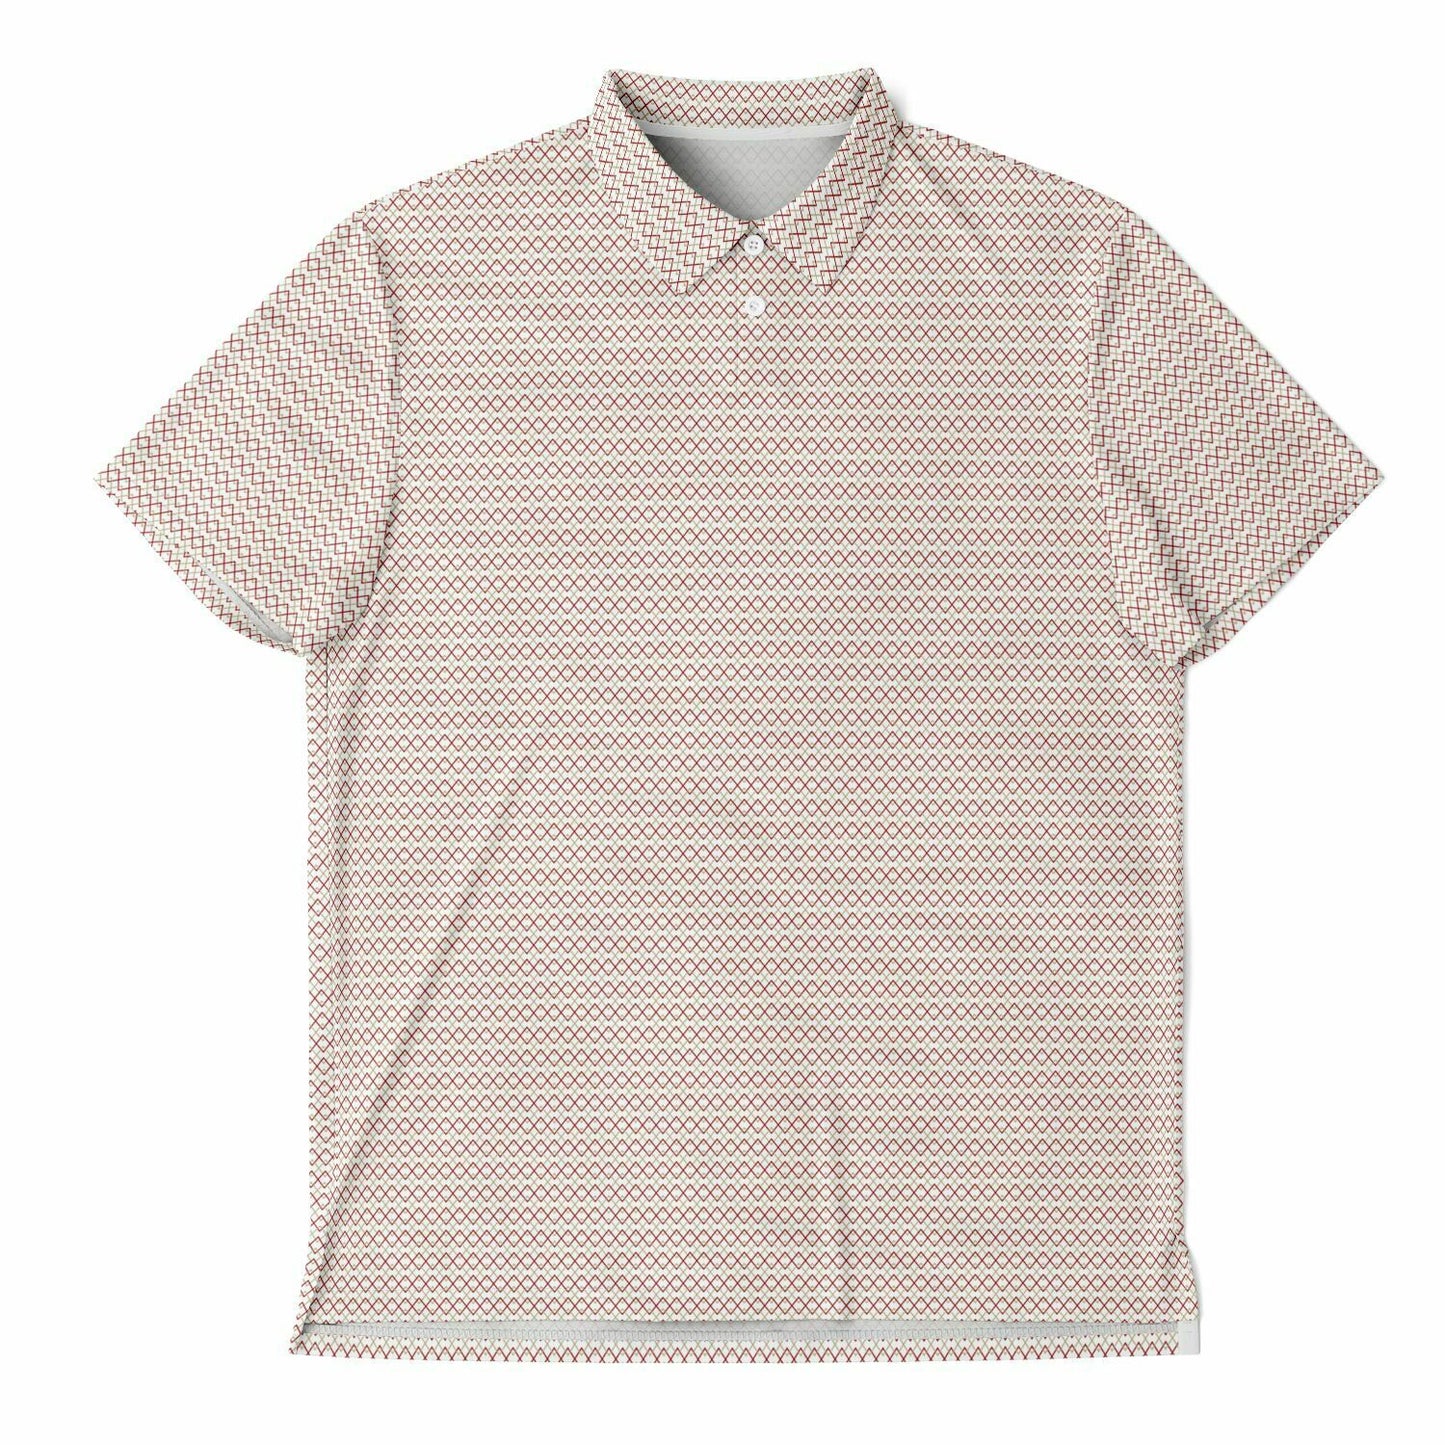 Zigs Spring Performance Polo